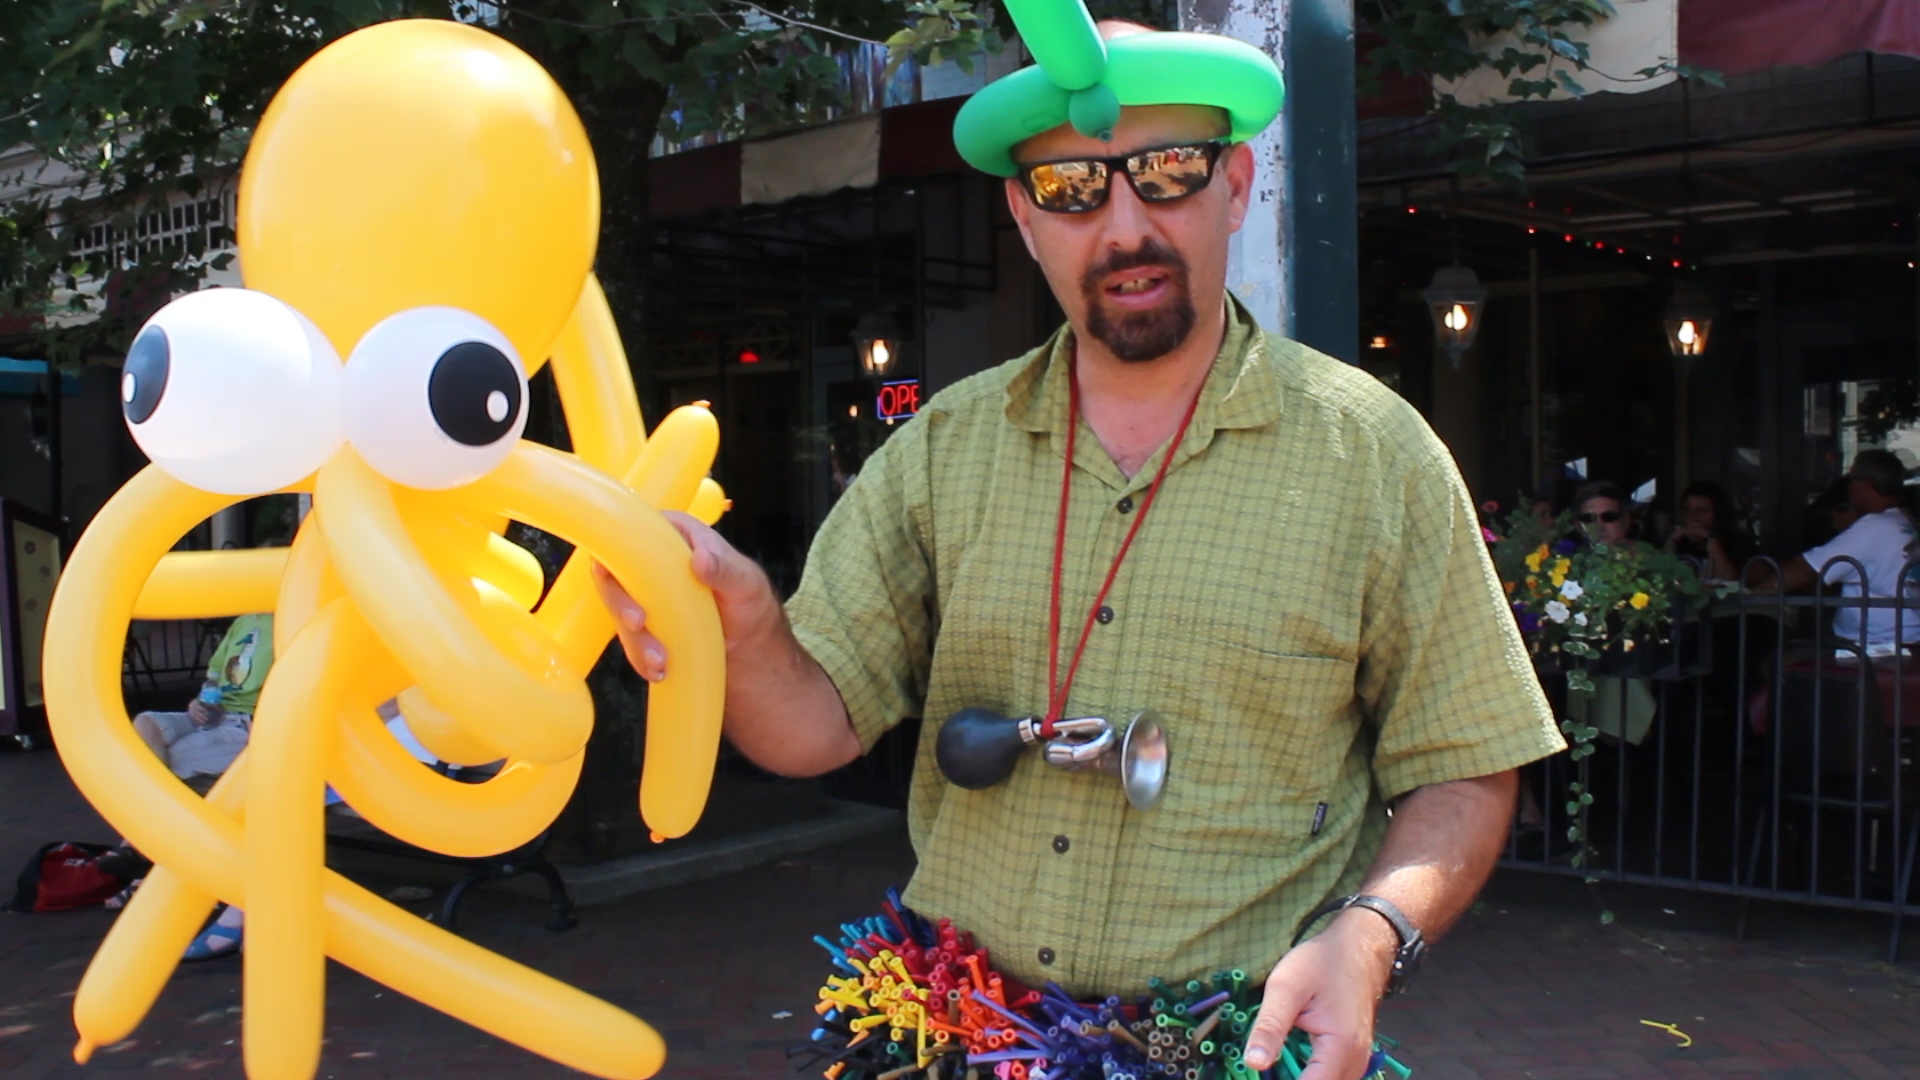 Angel the Balloon Man makes an awesome octopus